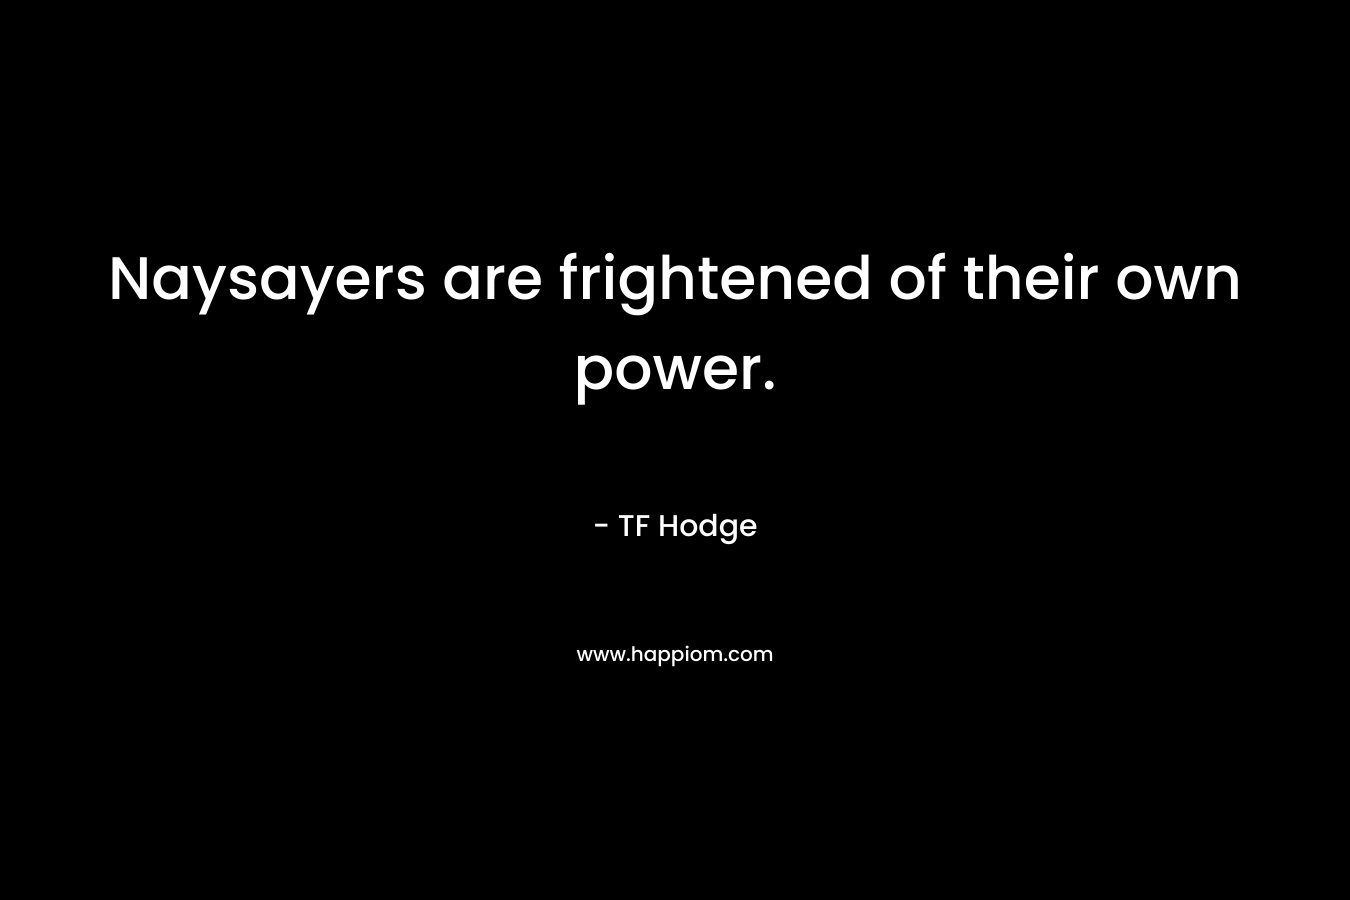 Naysayers are frightened of their own power. – TF Hodge